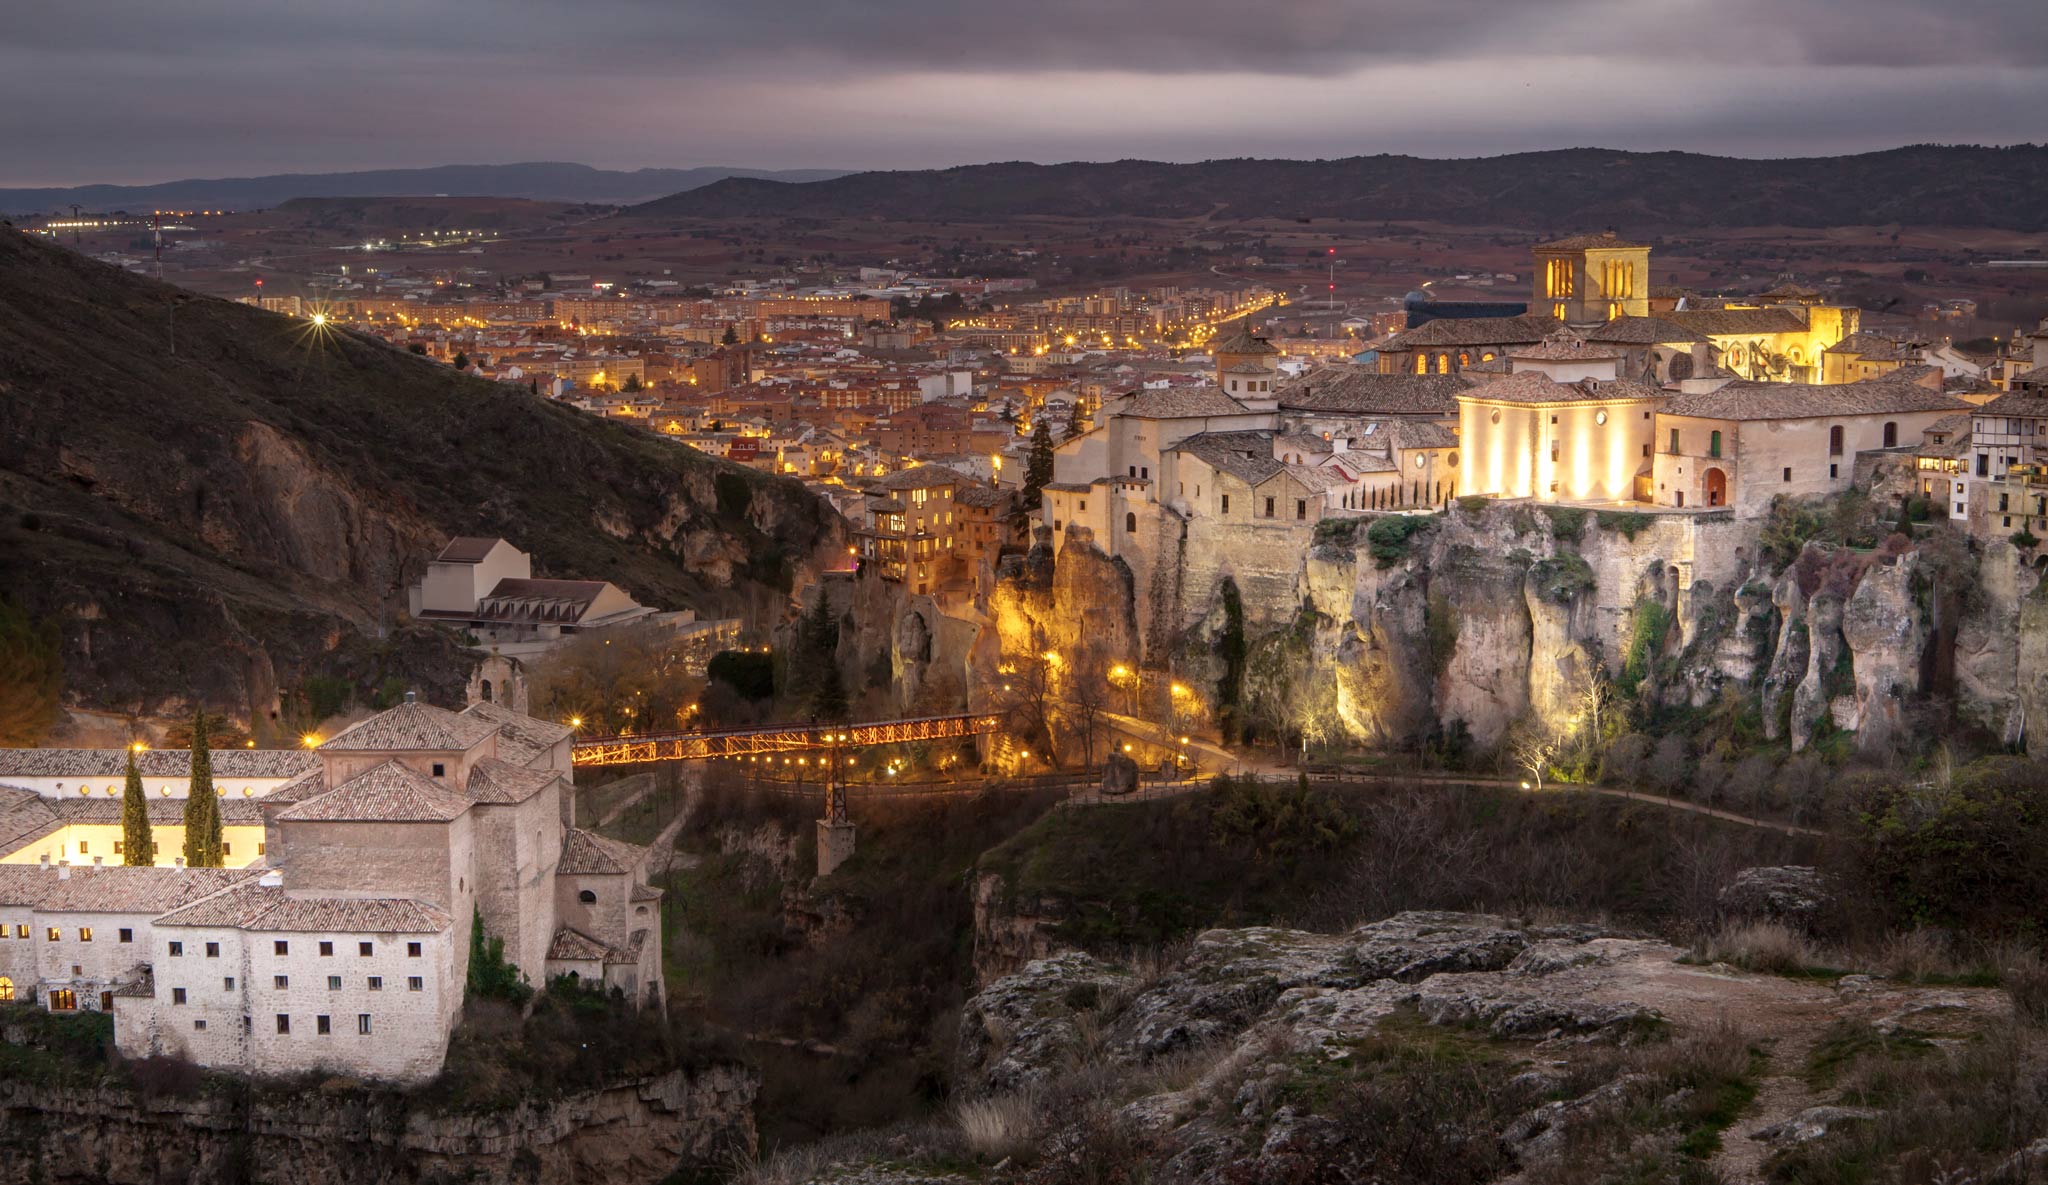 View of Cuenca at dusk, one of the most beautiful places to visit in Spain